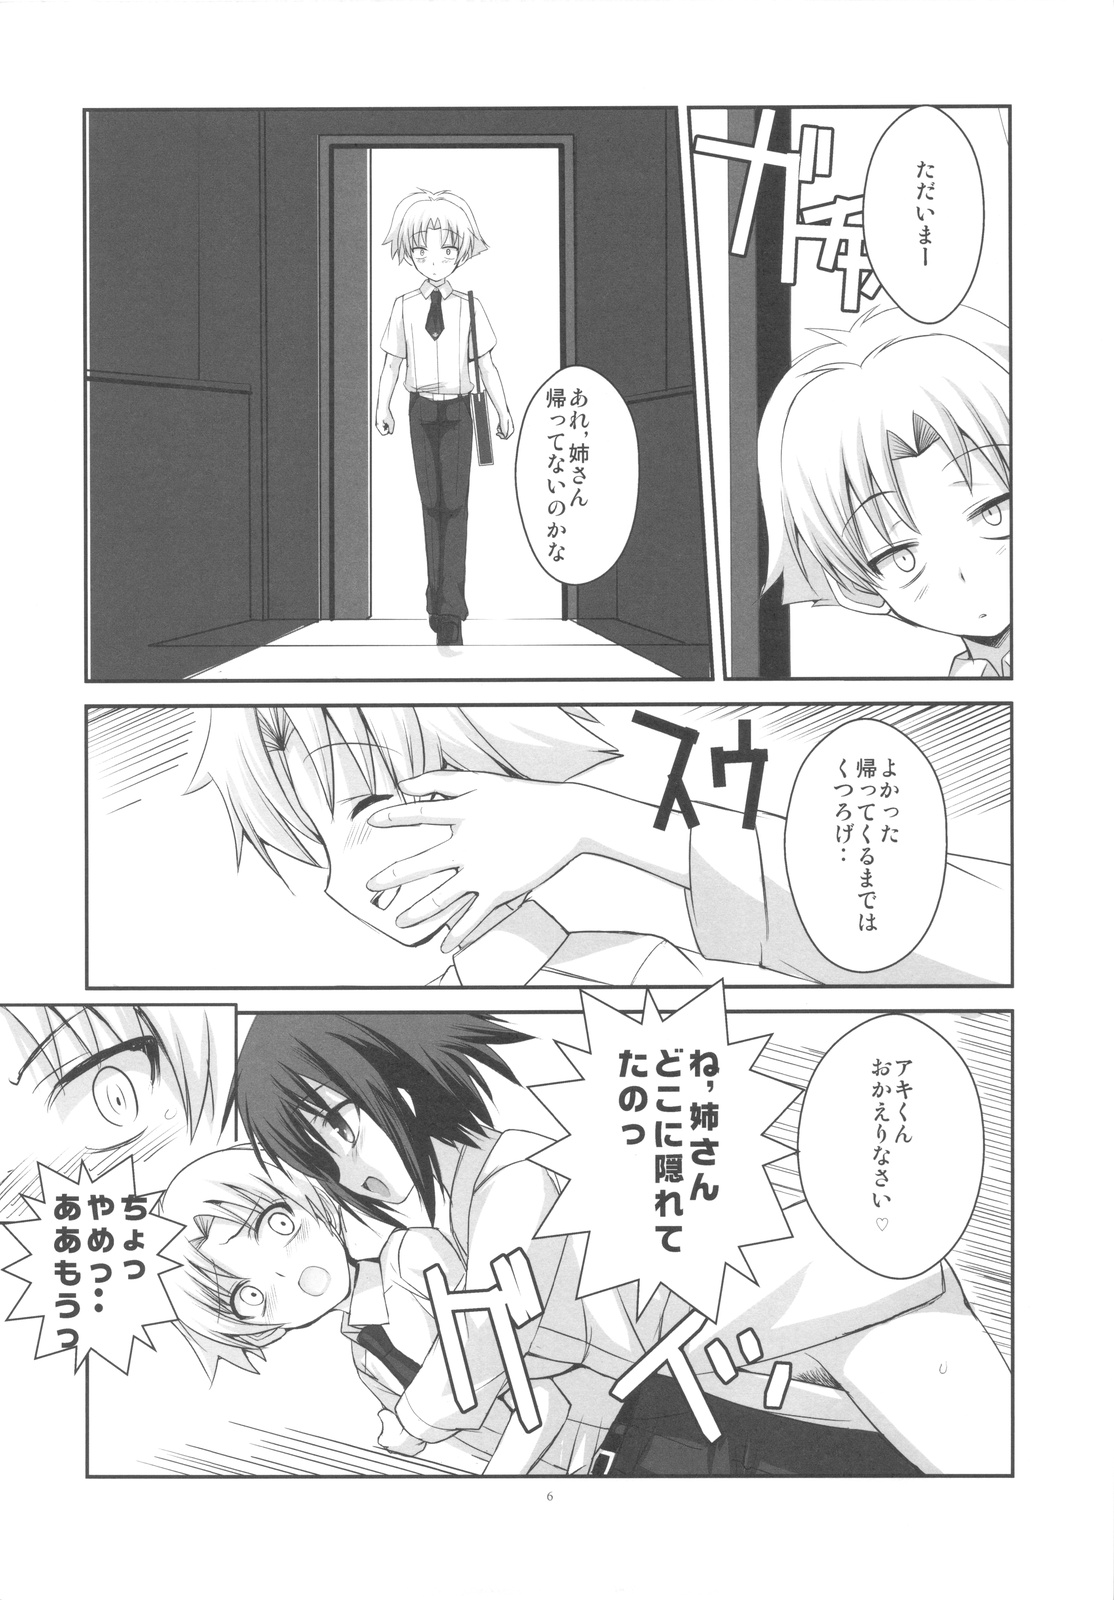 (COMIC1☆4) [R-WORKS] LOVE IS GAME OVER (Baka to Test to Shoukanjuu) page 6 full